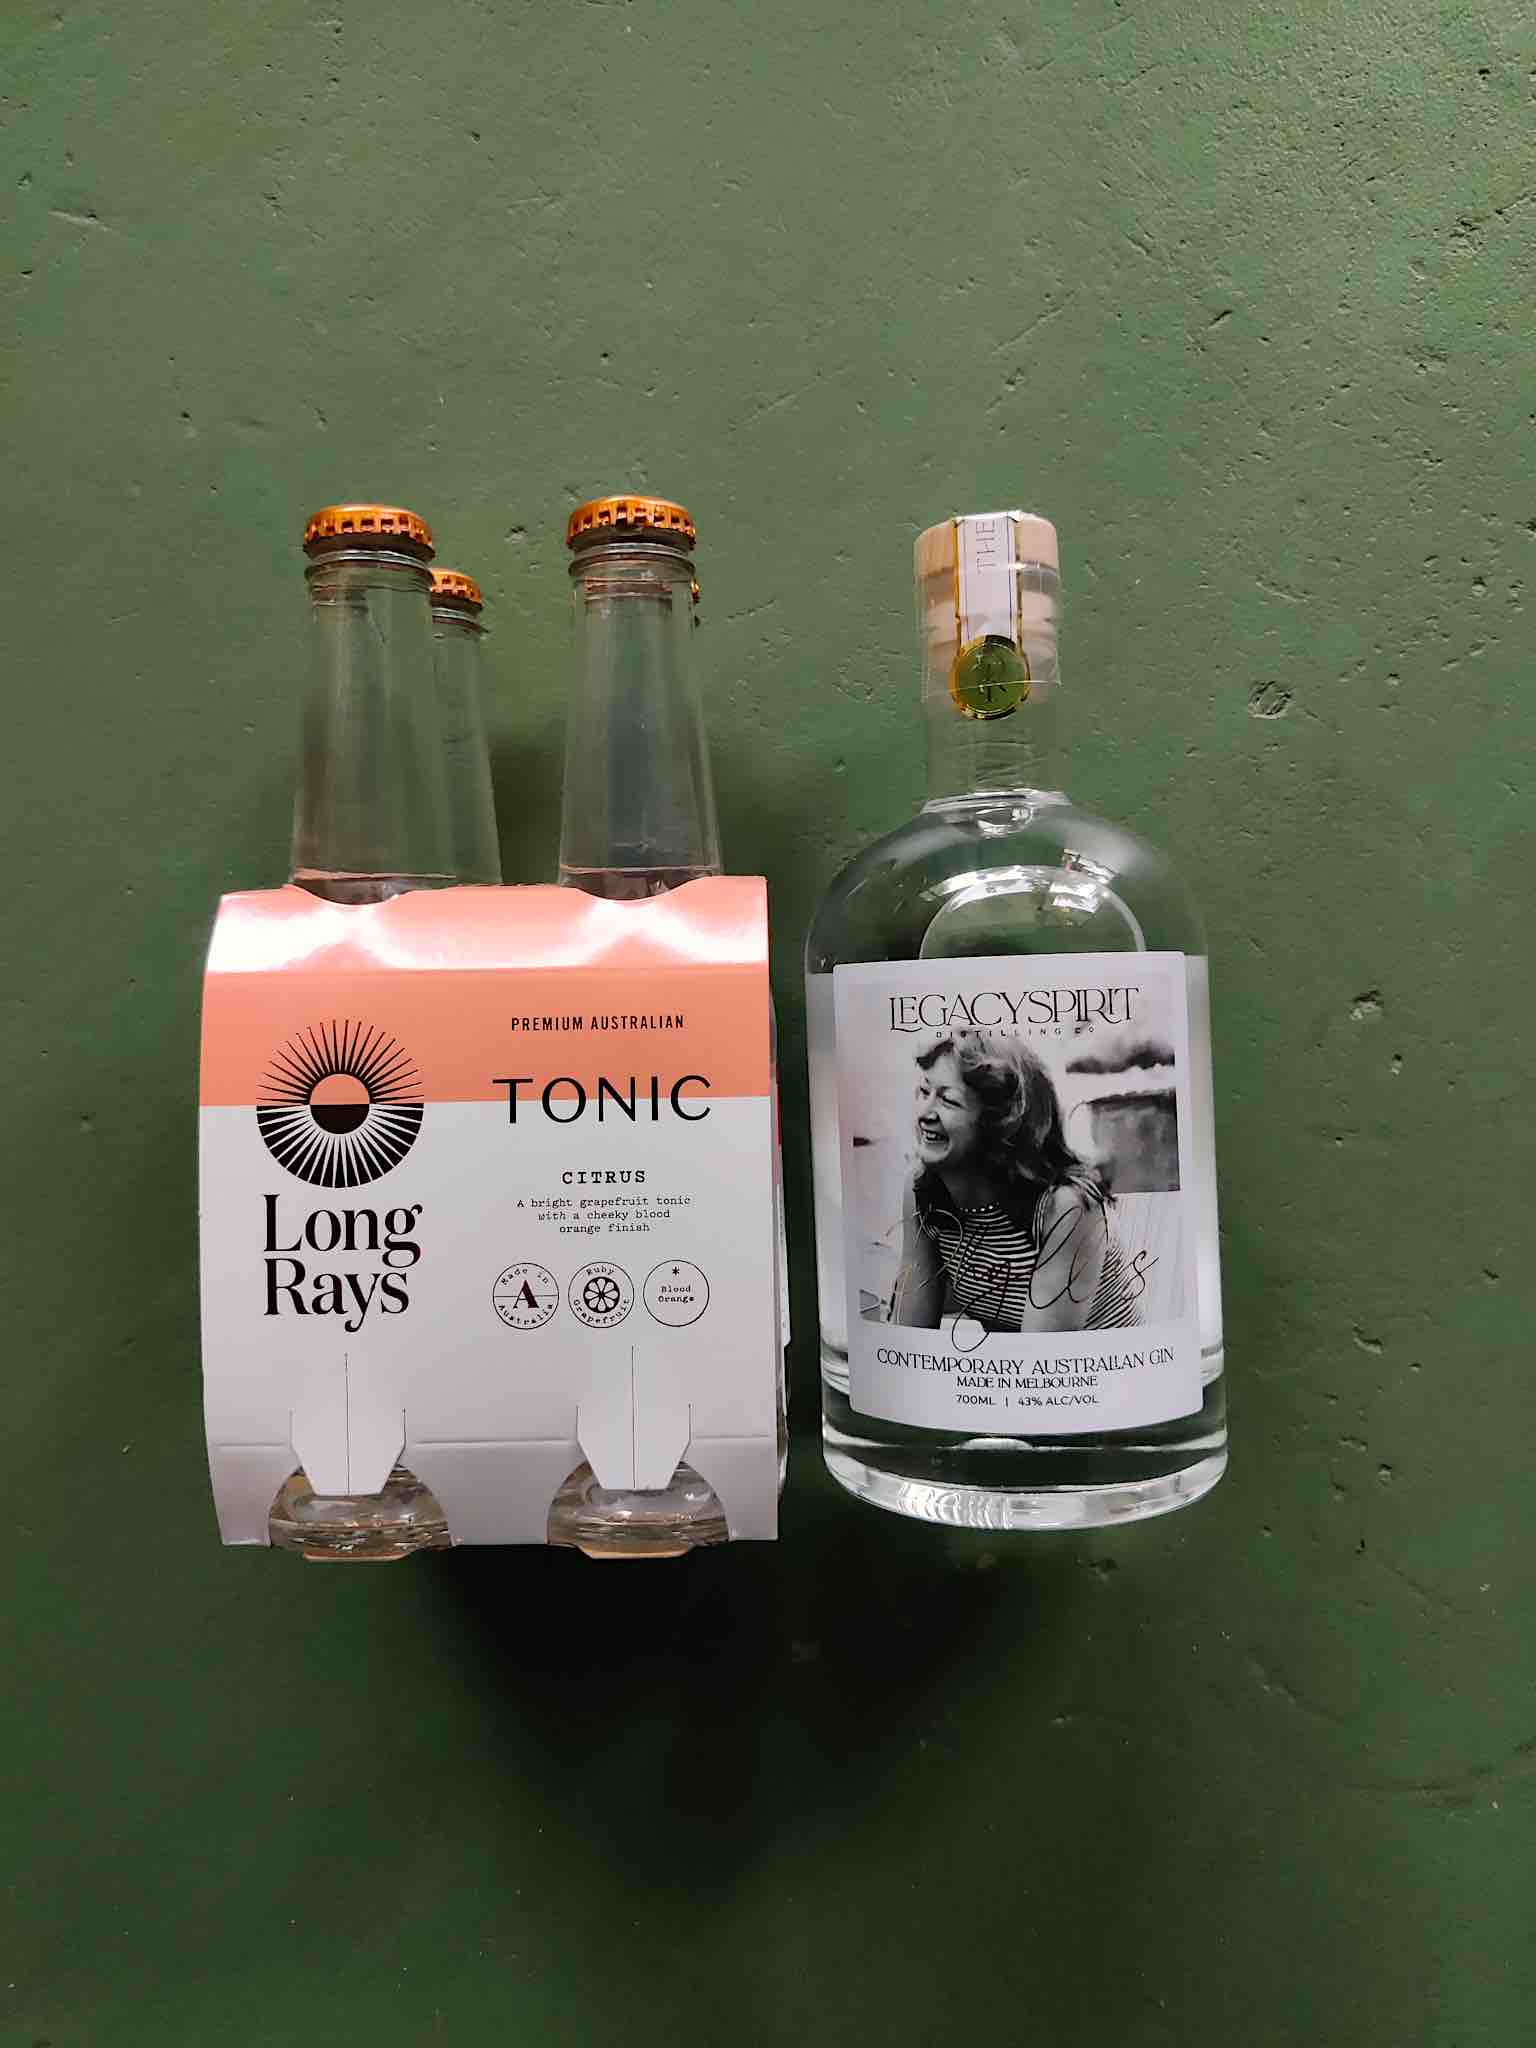 A bottle of Legacy Spirit Phyllis Gin with a 4 pack of Long Rays Citrus Tonic.